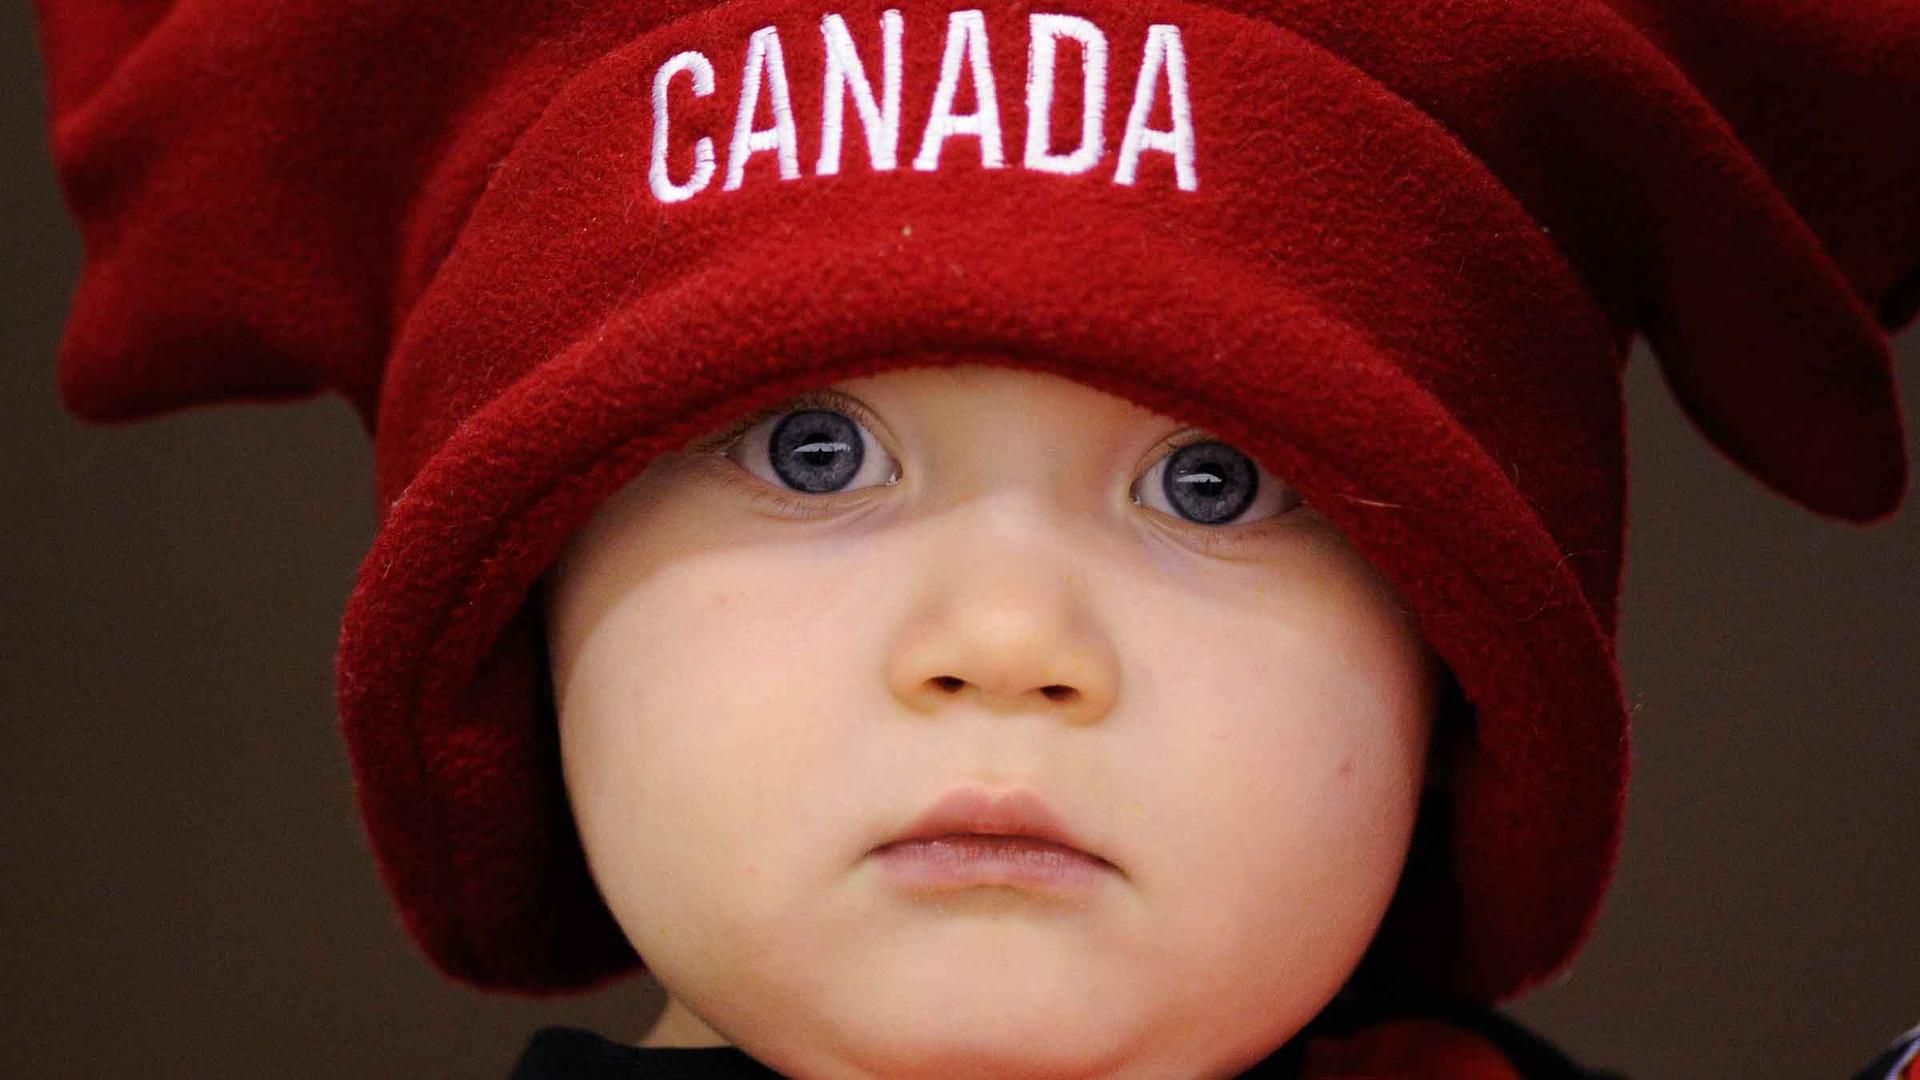 Sixteen-month-old Canada fan Rogan Clark watches team Canada and team Switzerland warm up before their exhibition hockey game in Red Deer, Alberta.